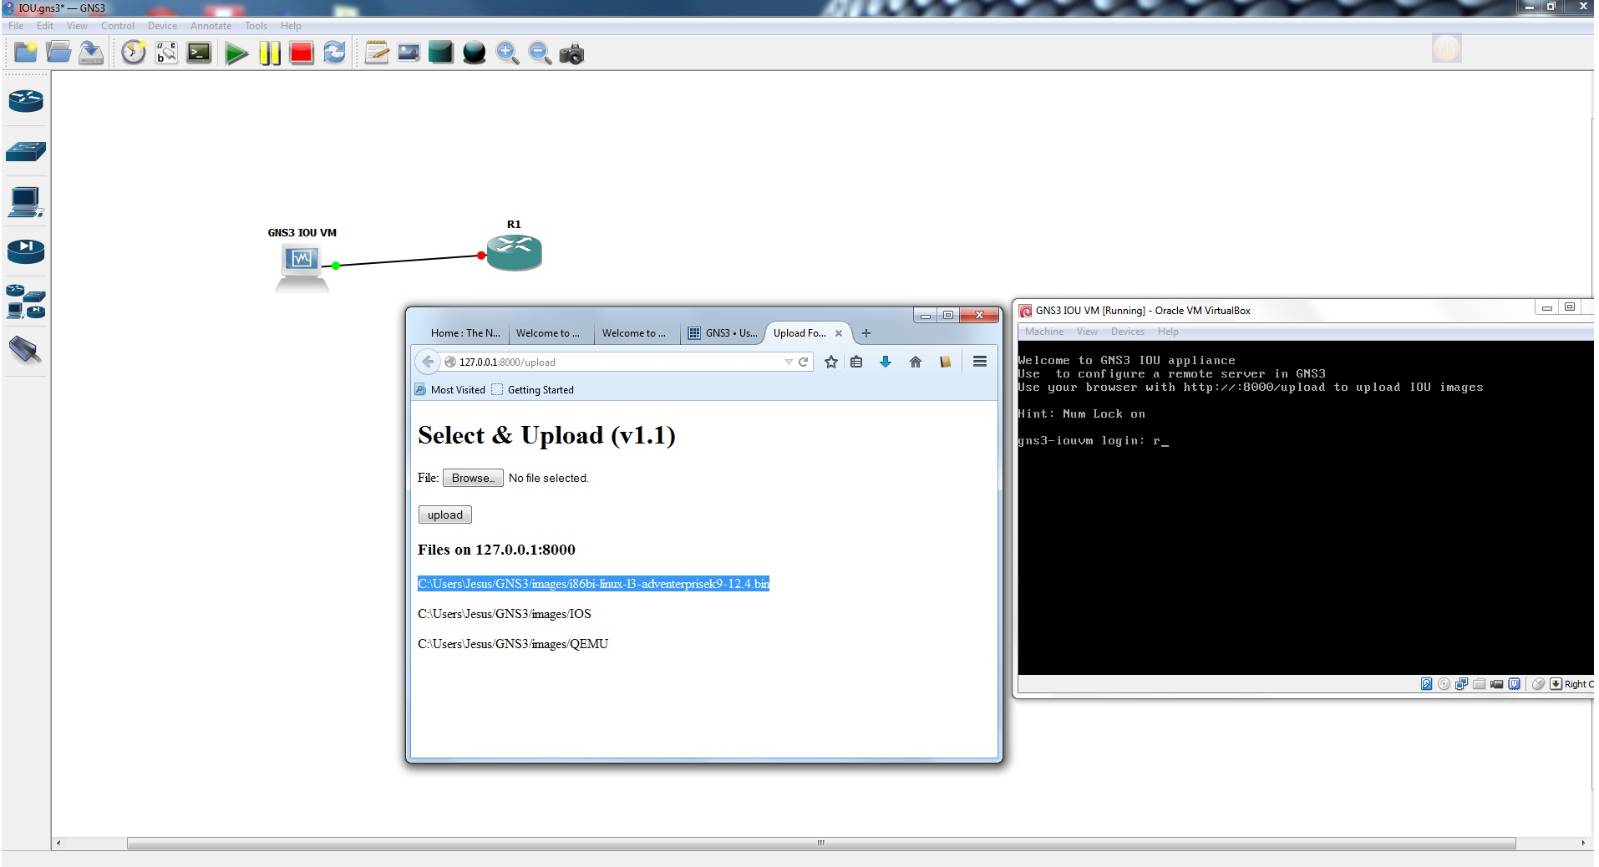 download cisco ios images and use in gns3